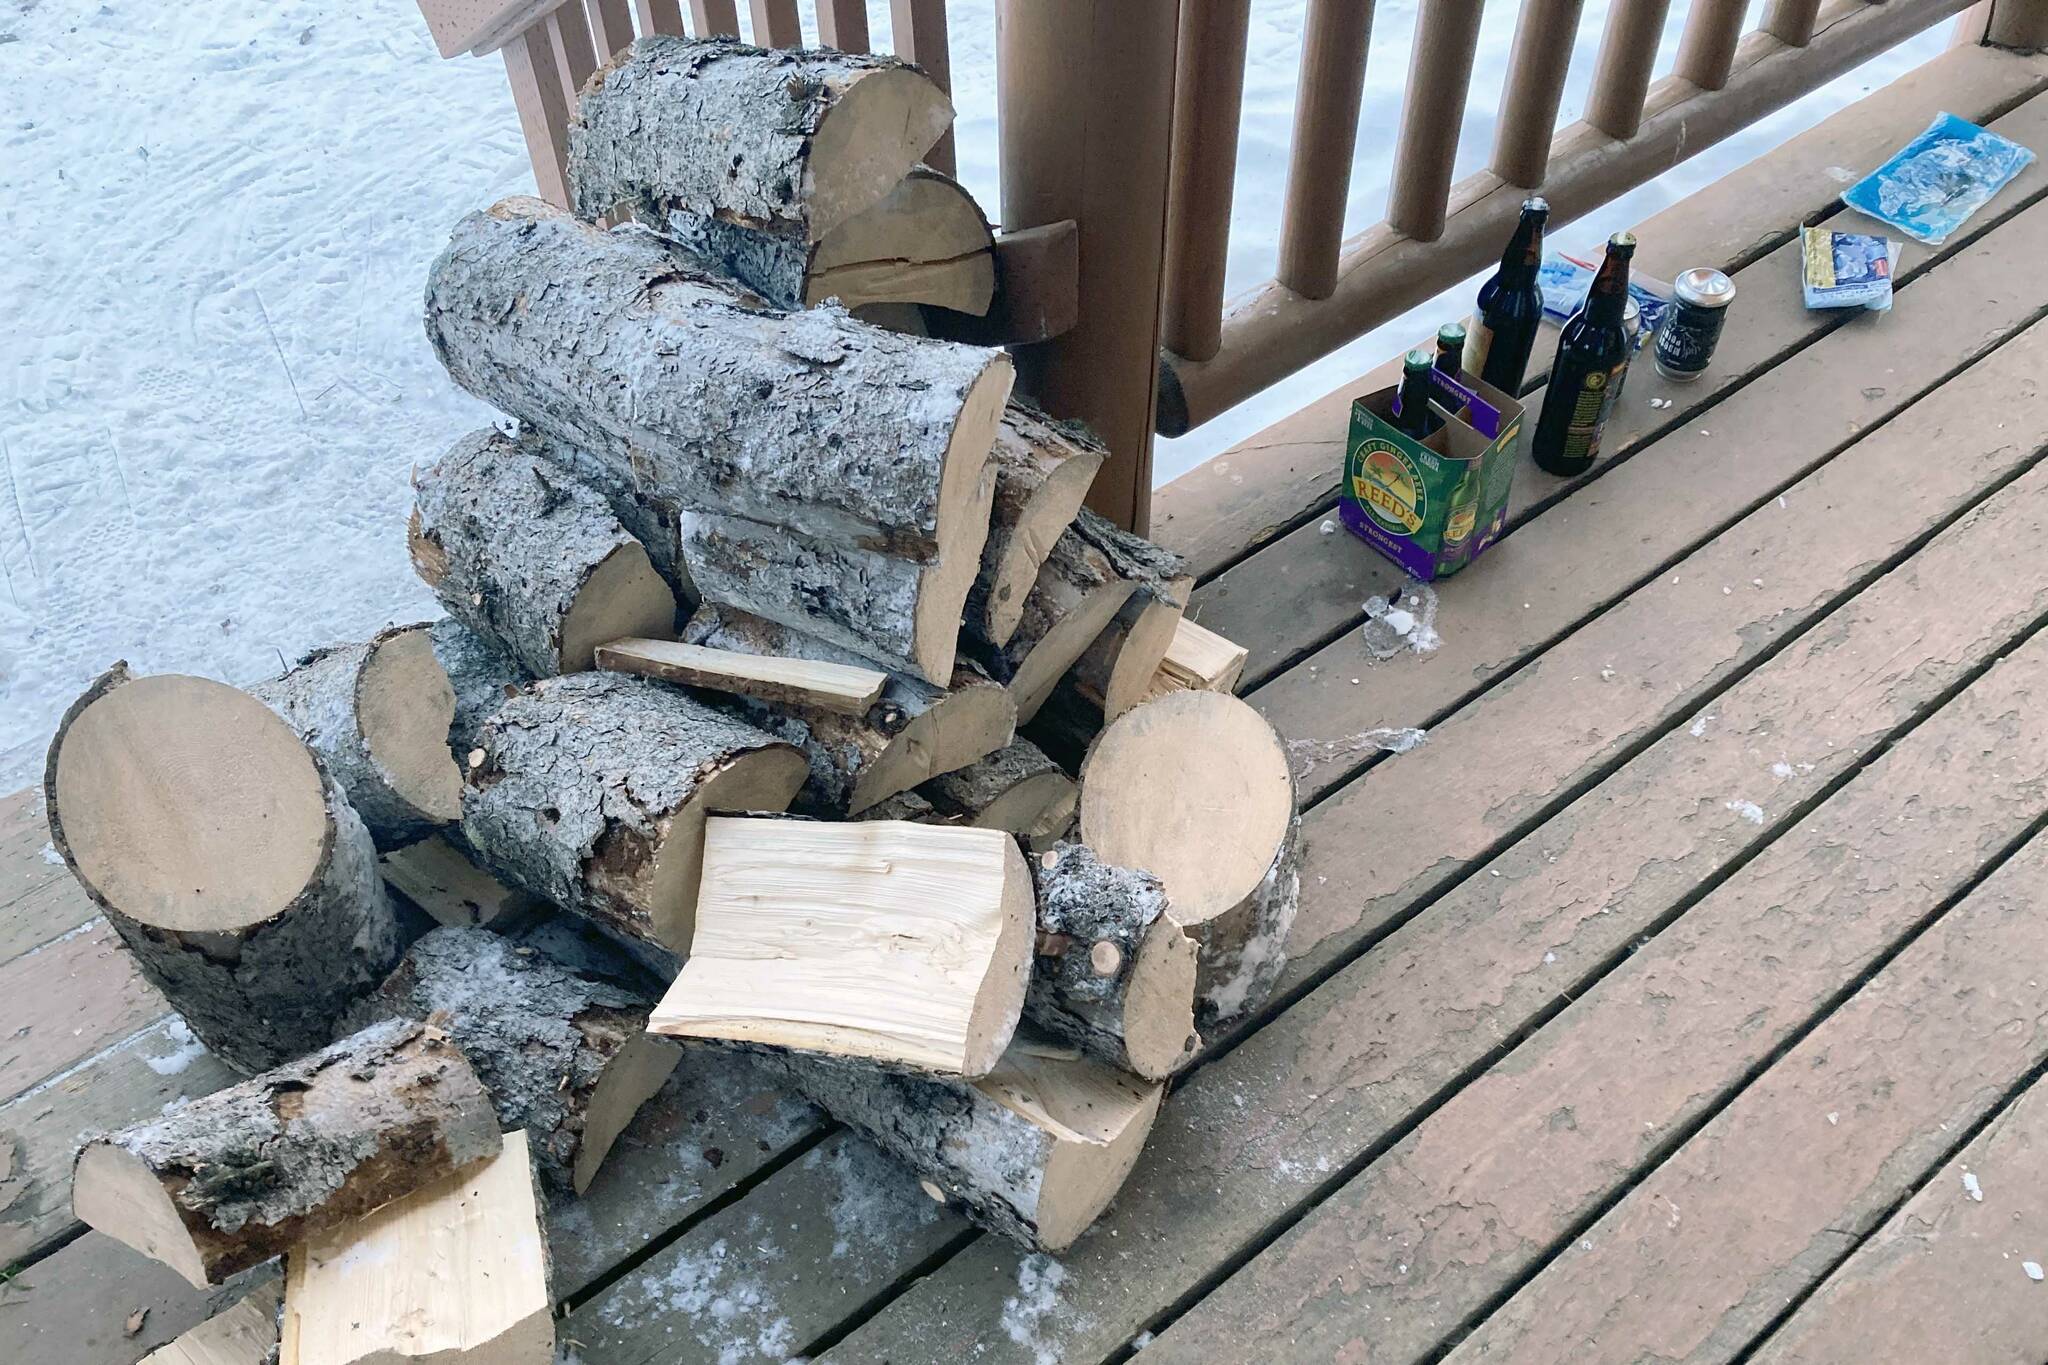 Split spruce for firewood sits on the porch of the Dolly Varden Lake cabin on Feb. 5, 2023, in the Kenai National Wildlife Refuge in Alaska. (Photo by Jeff Helminiak/Peninsula Clarion)